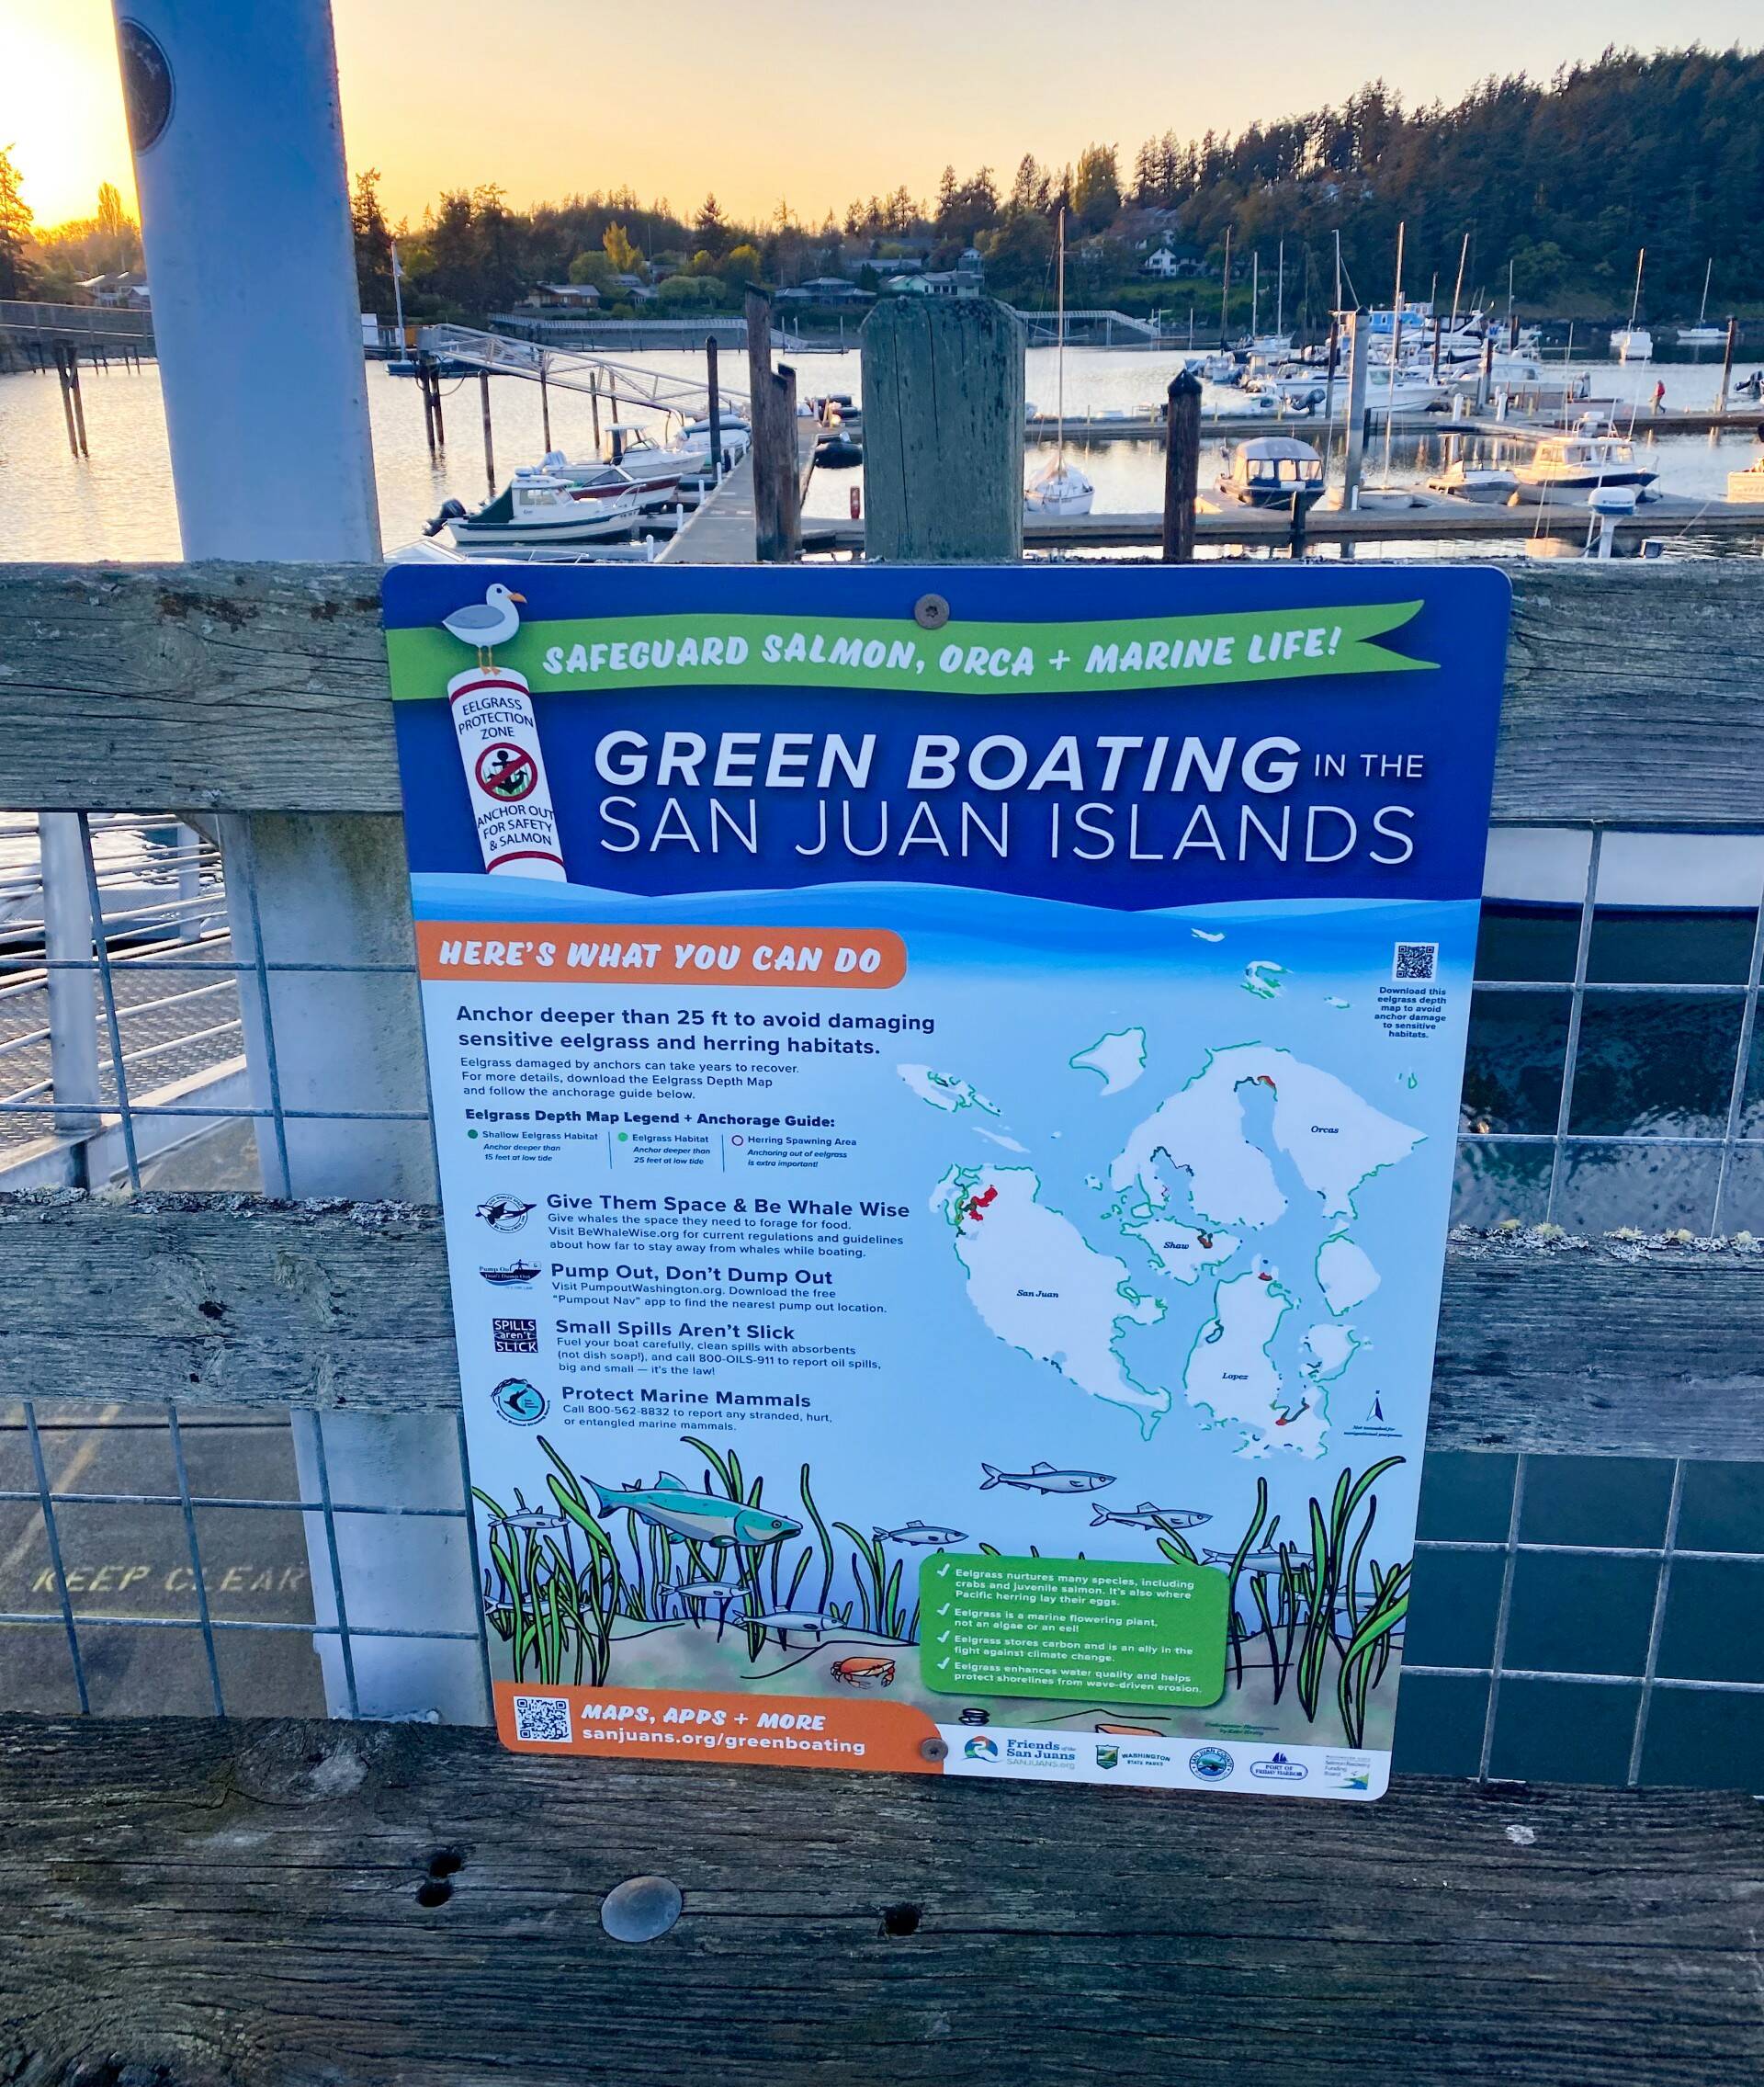 Contributed photo
To make it easier for boaters to be “Green,” Friends has created new educational signs with maps and data on eelgrass and herring habitats, whales, and handy resources for boaters. These signs are being installed at marine parks, docks, and marinas across the islands.